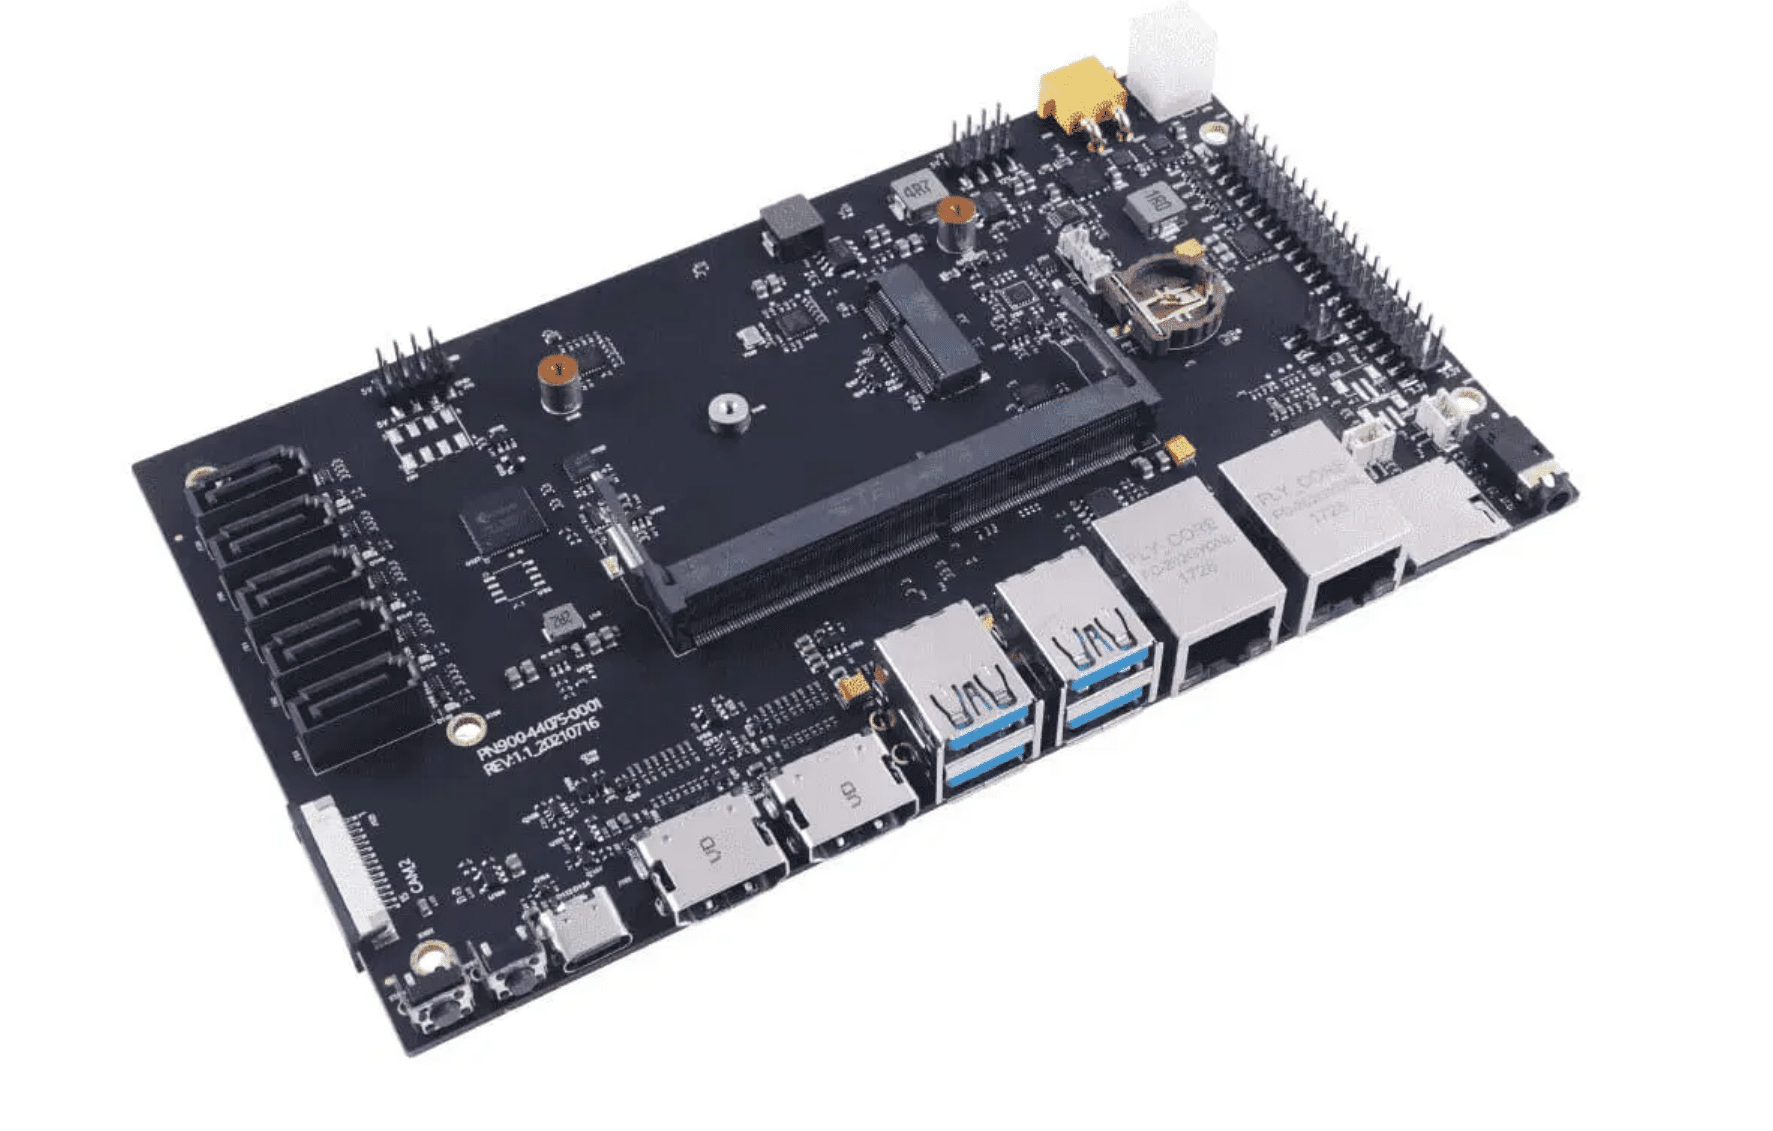 Leetop A205 – NVIDIA Jetson Nano/Xavier NX carrier board with Dual Gigabit Ethernet, 5 SATA, 6 CSI camera and Support for 4G